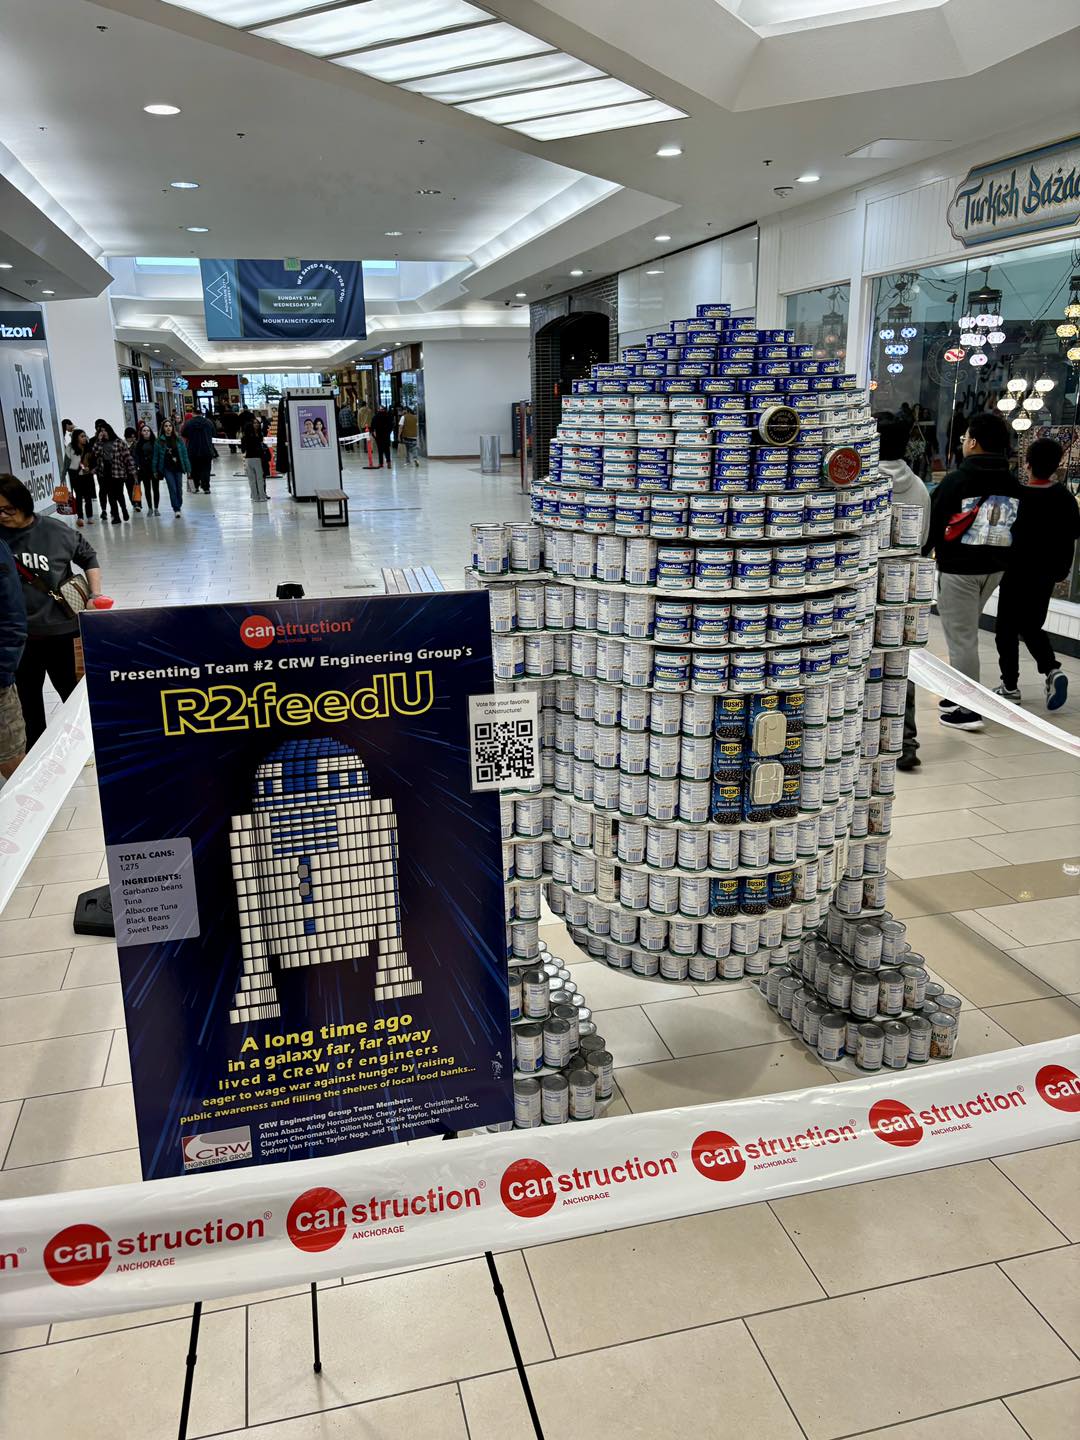 Featured image for “Disney-themed magical creations come to life at Anchorage CANstruction”